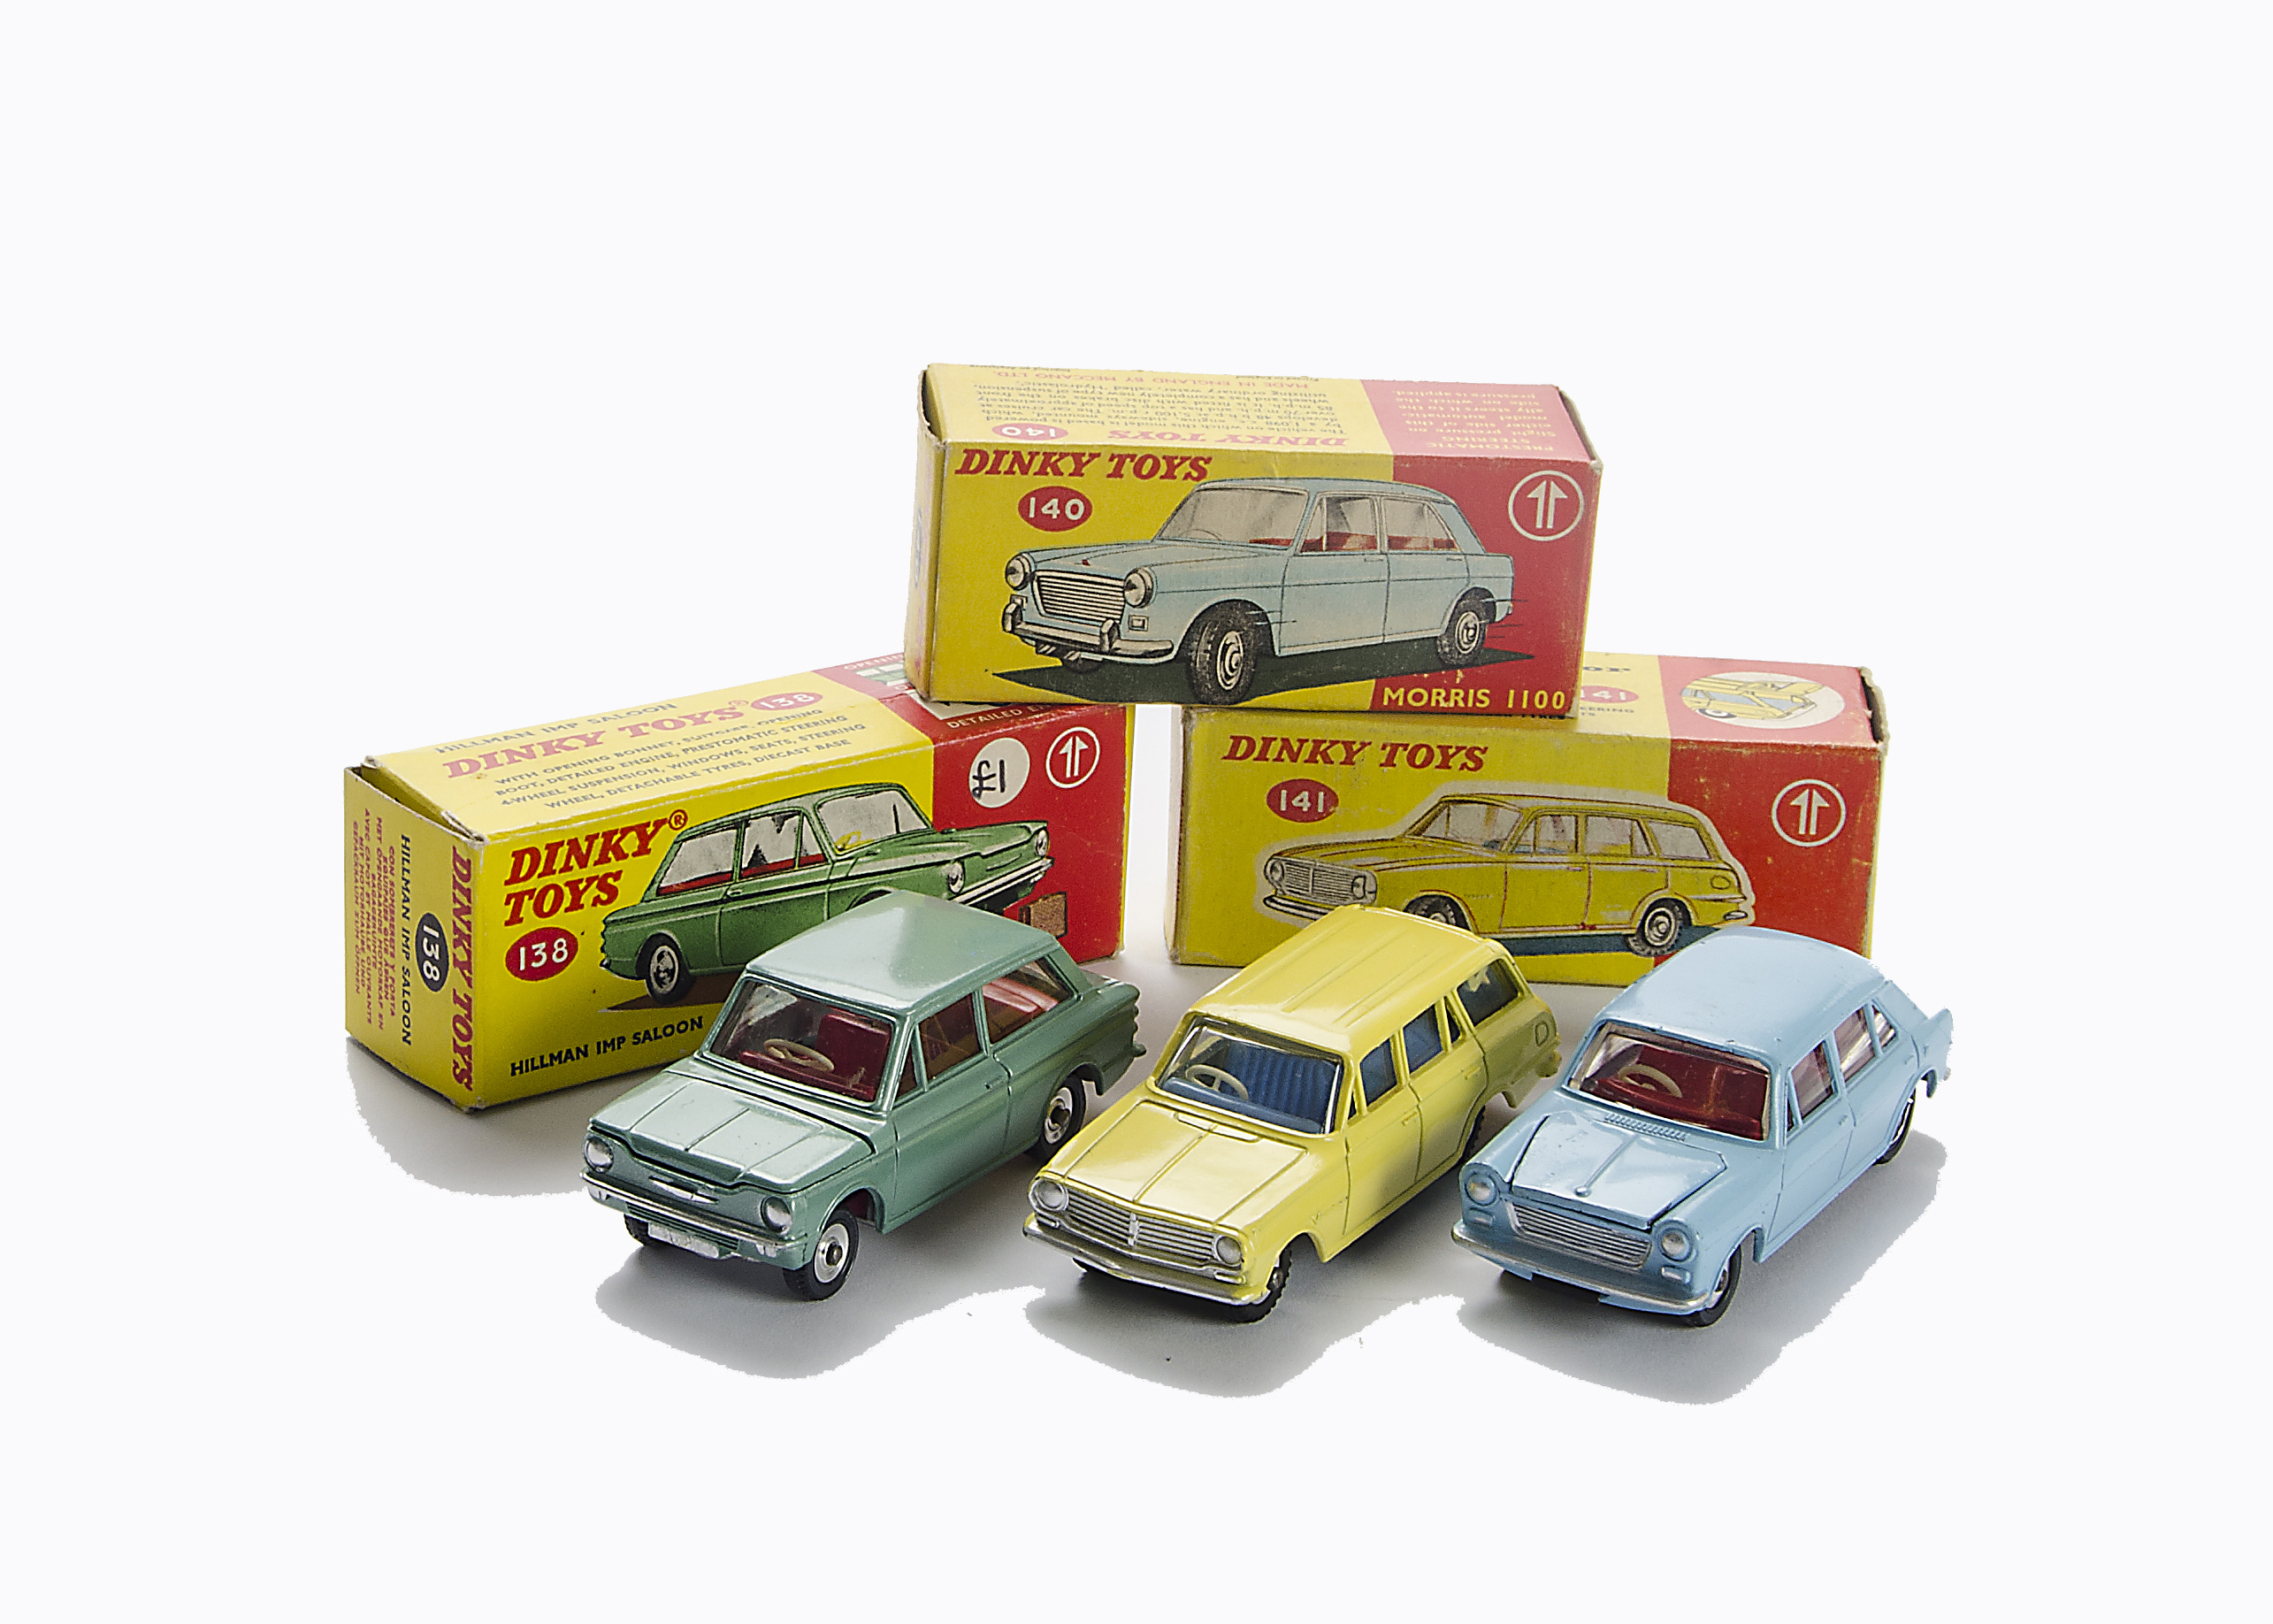 Dinky Toys Cars, 140 Morris 1100, light blue body, 141 Vauxhall Victor Estate, yellow body, blue